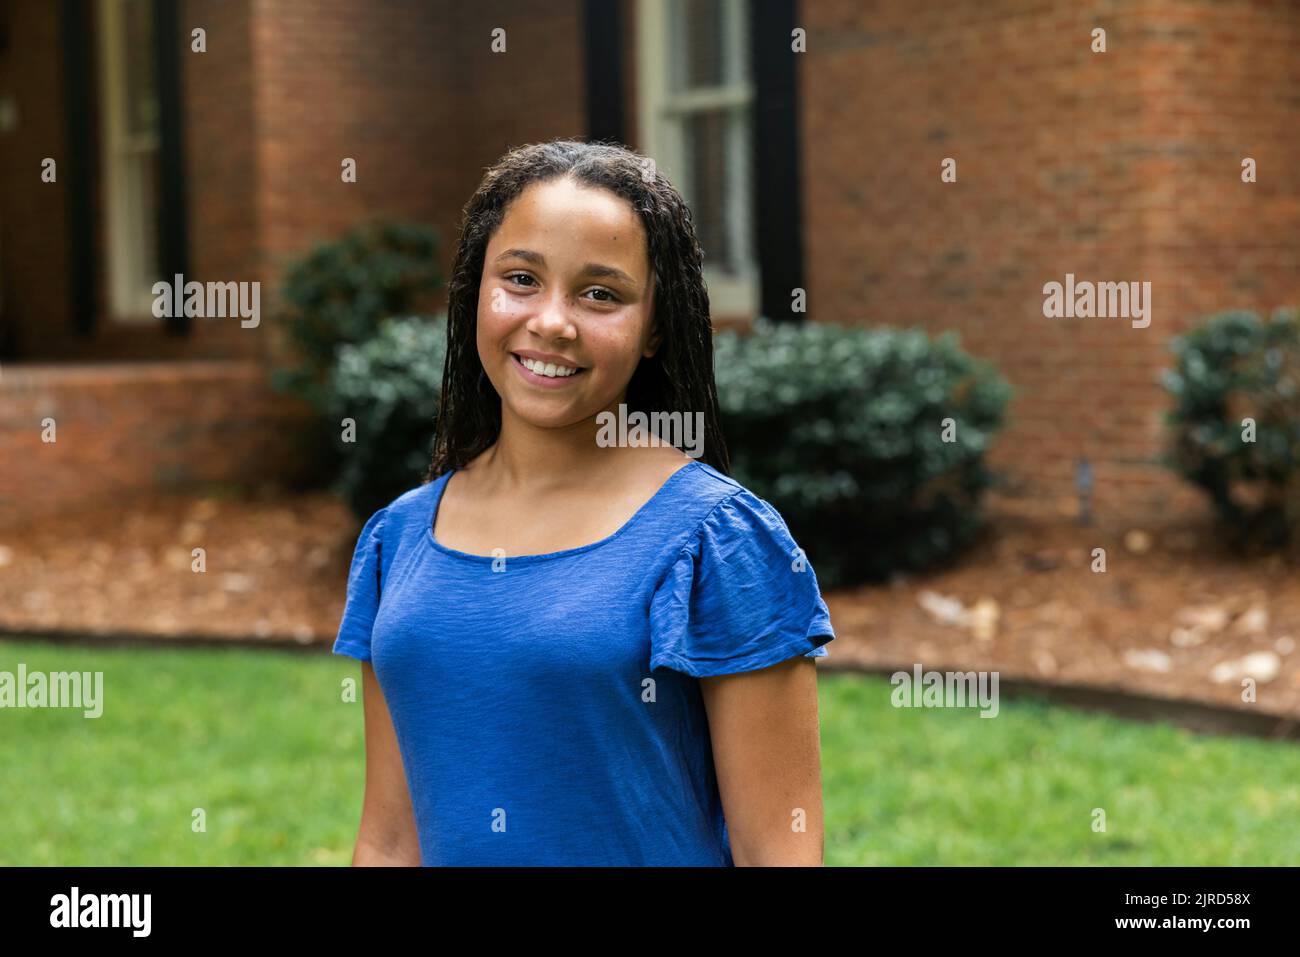 Middle School aged girls in a blue dress standing outside her home for a portrait Stock Photo